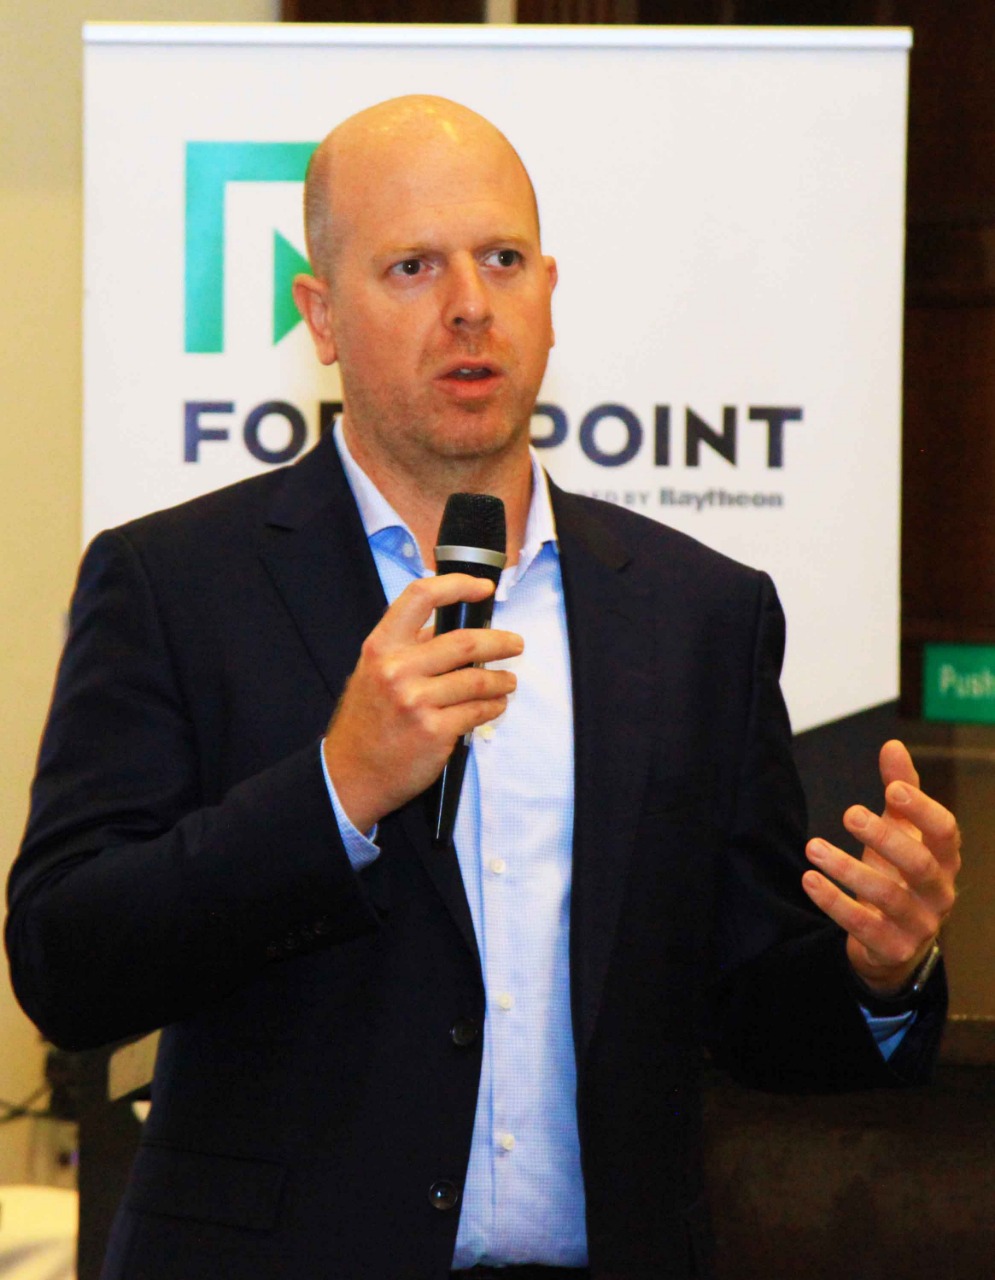 Nicolas Fischbach, Global CTO, Forcepoint